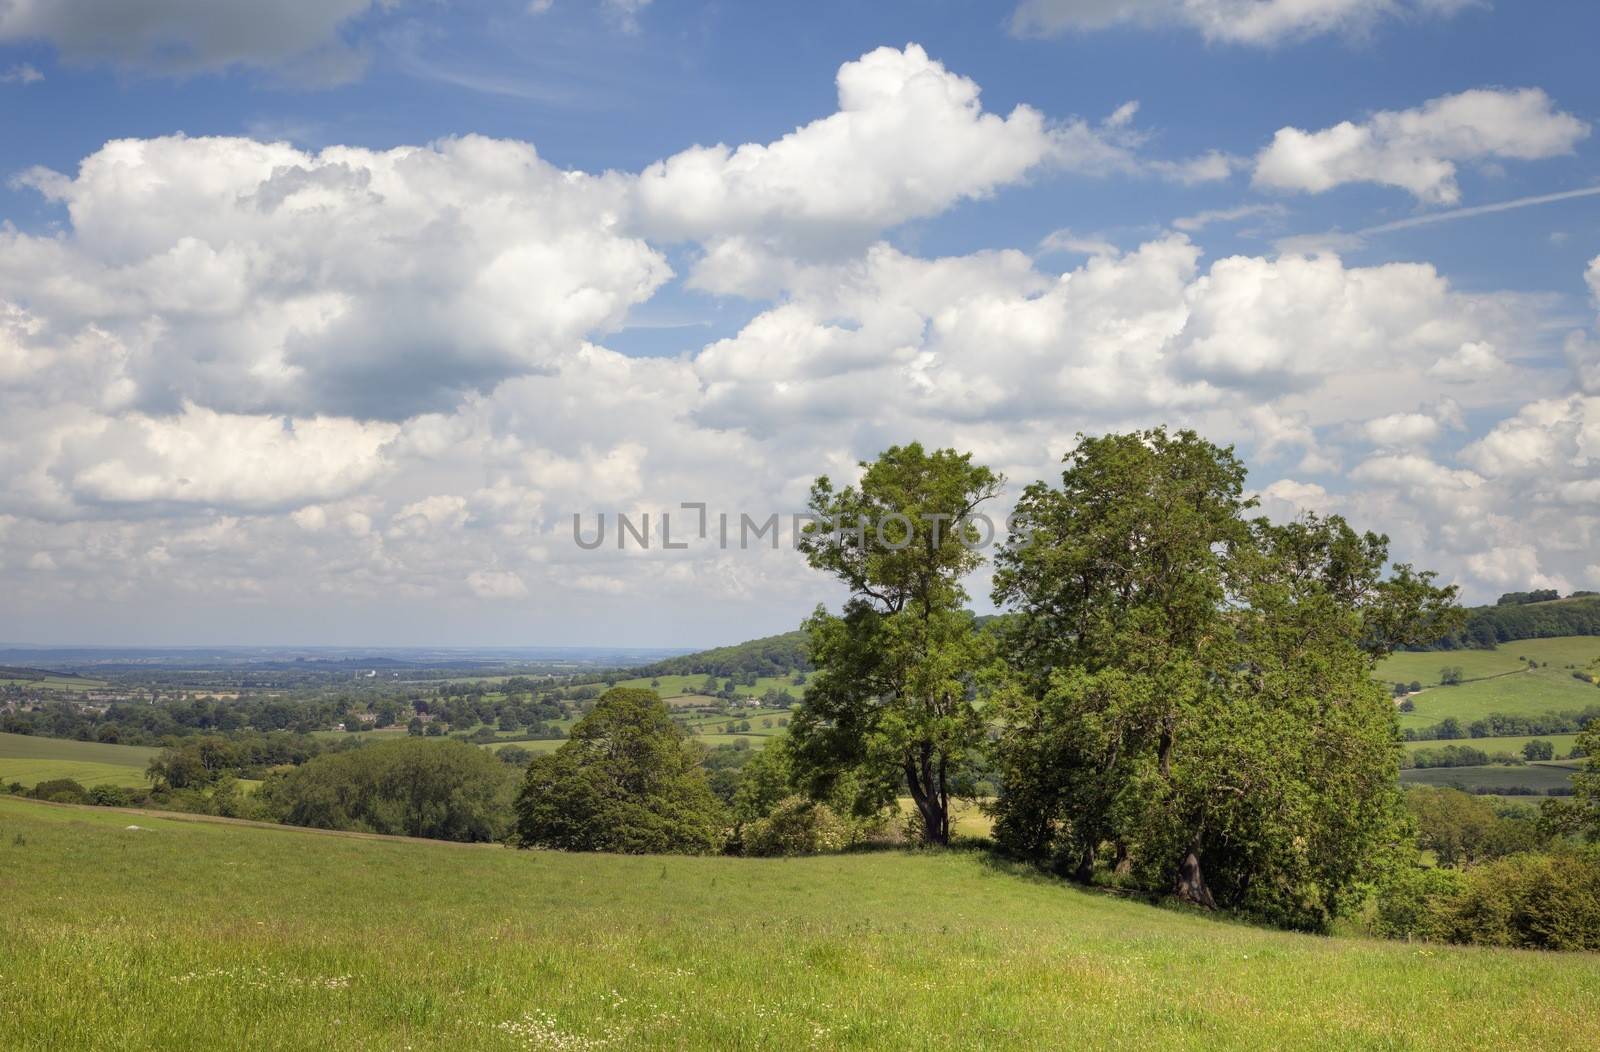 Looking over the rolling hills towards the Cotswold town of Winchcombe near Cheltenham, Gloucestershire, England.